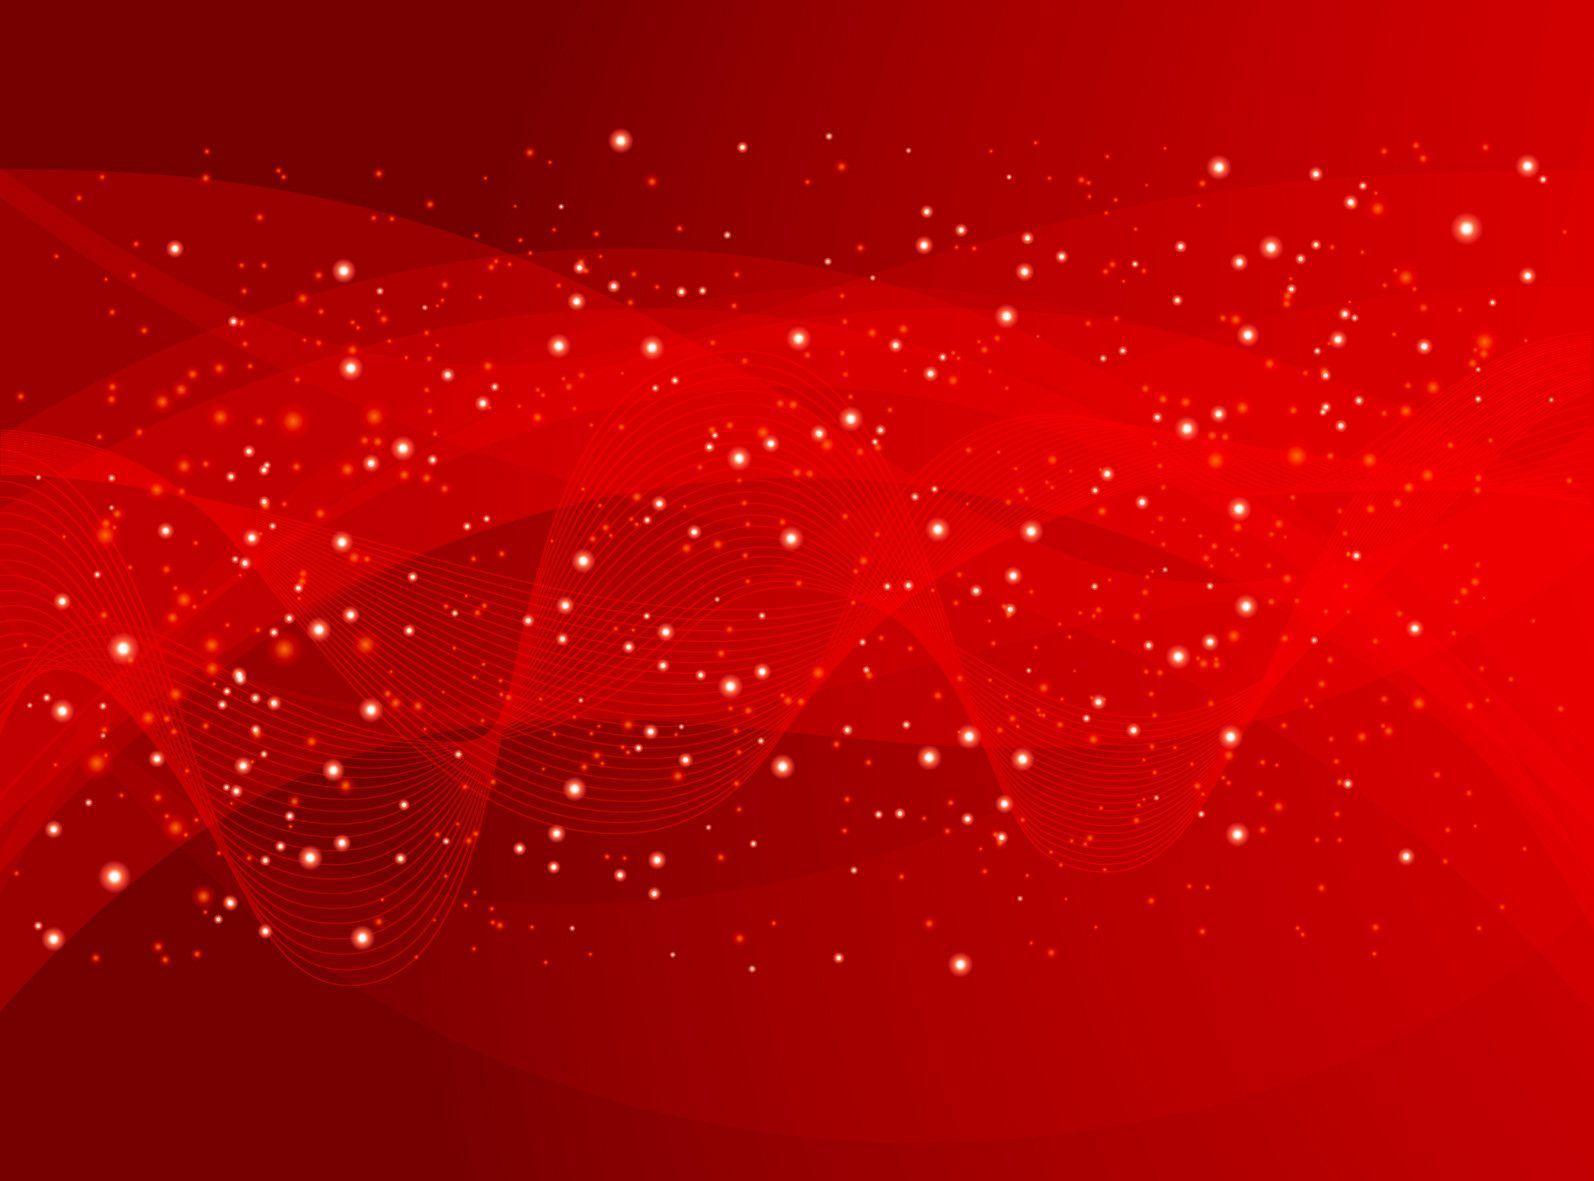 Background & Textures Vector, Free Gauzy Starry Red Abstract